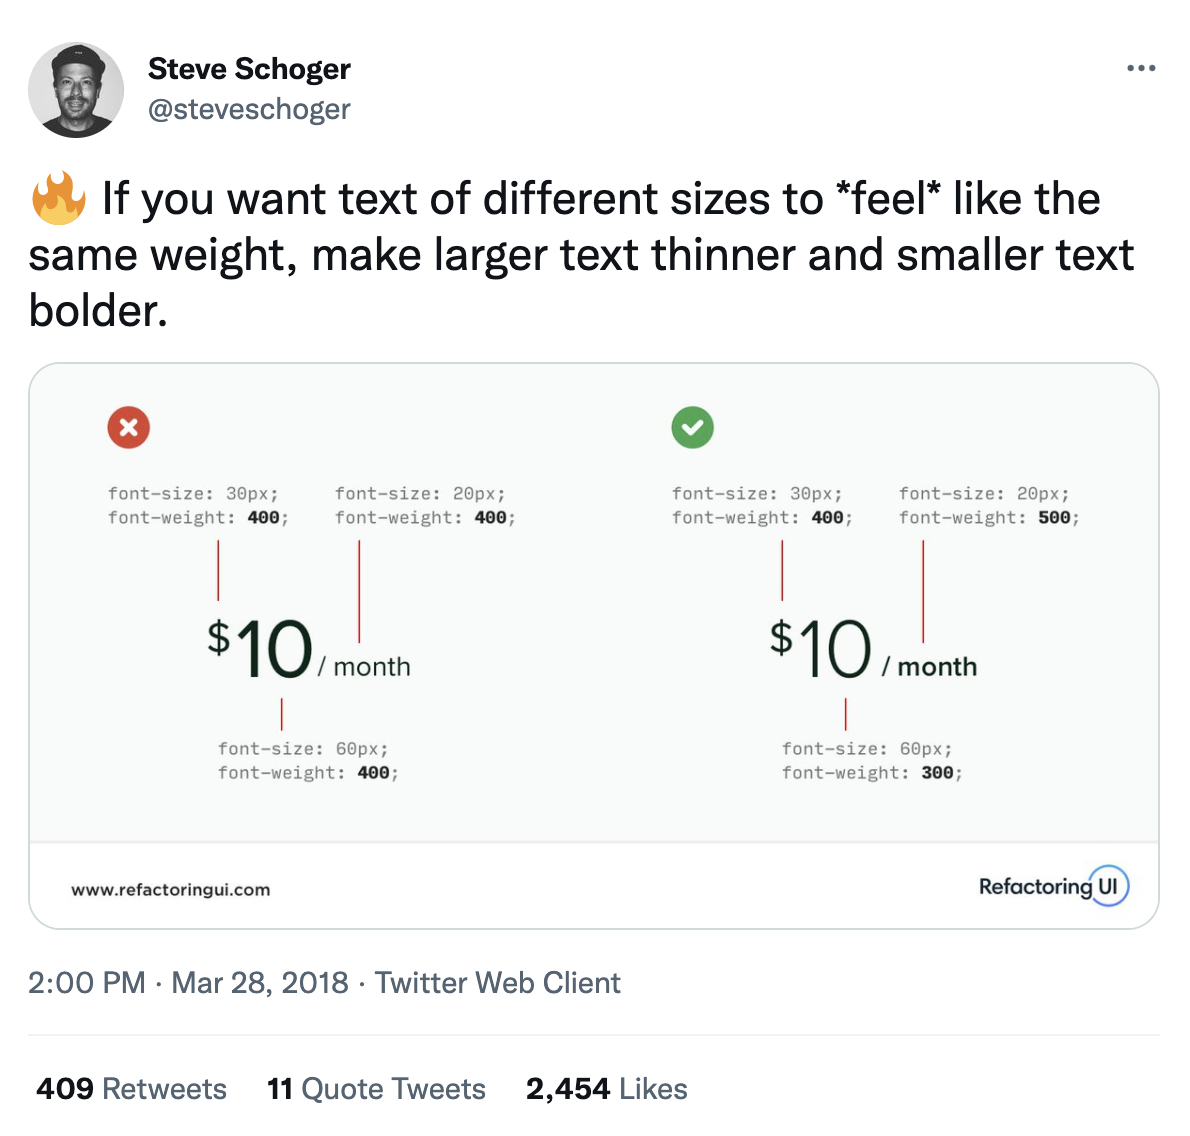 Tweet: “If you want text of different sizes to *feel* like the same weight, make larger text thinner and smaller text bolder.”